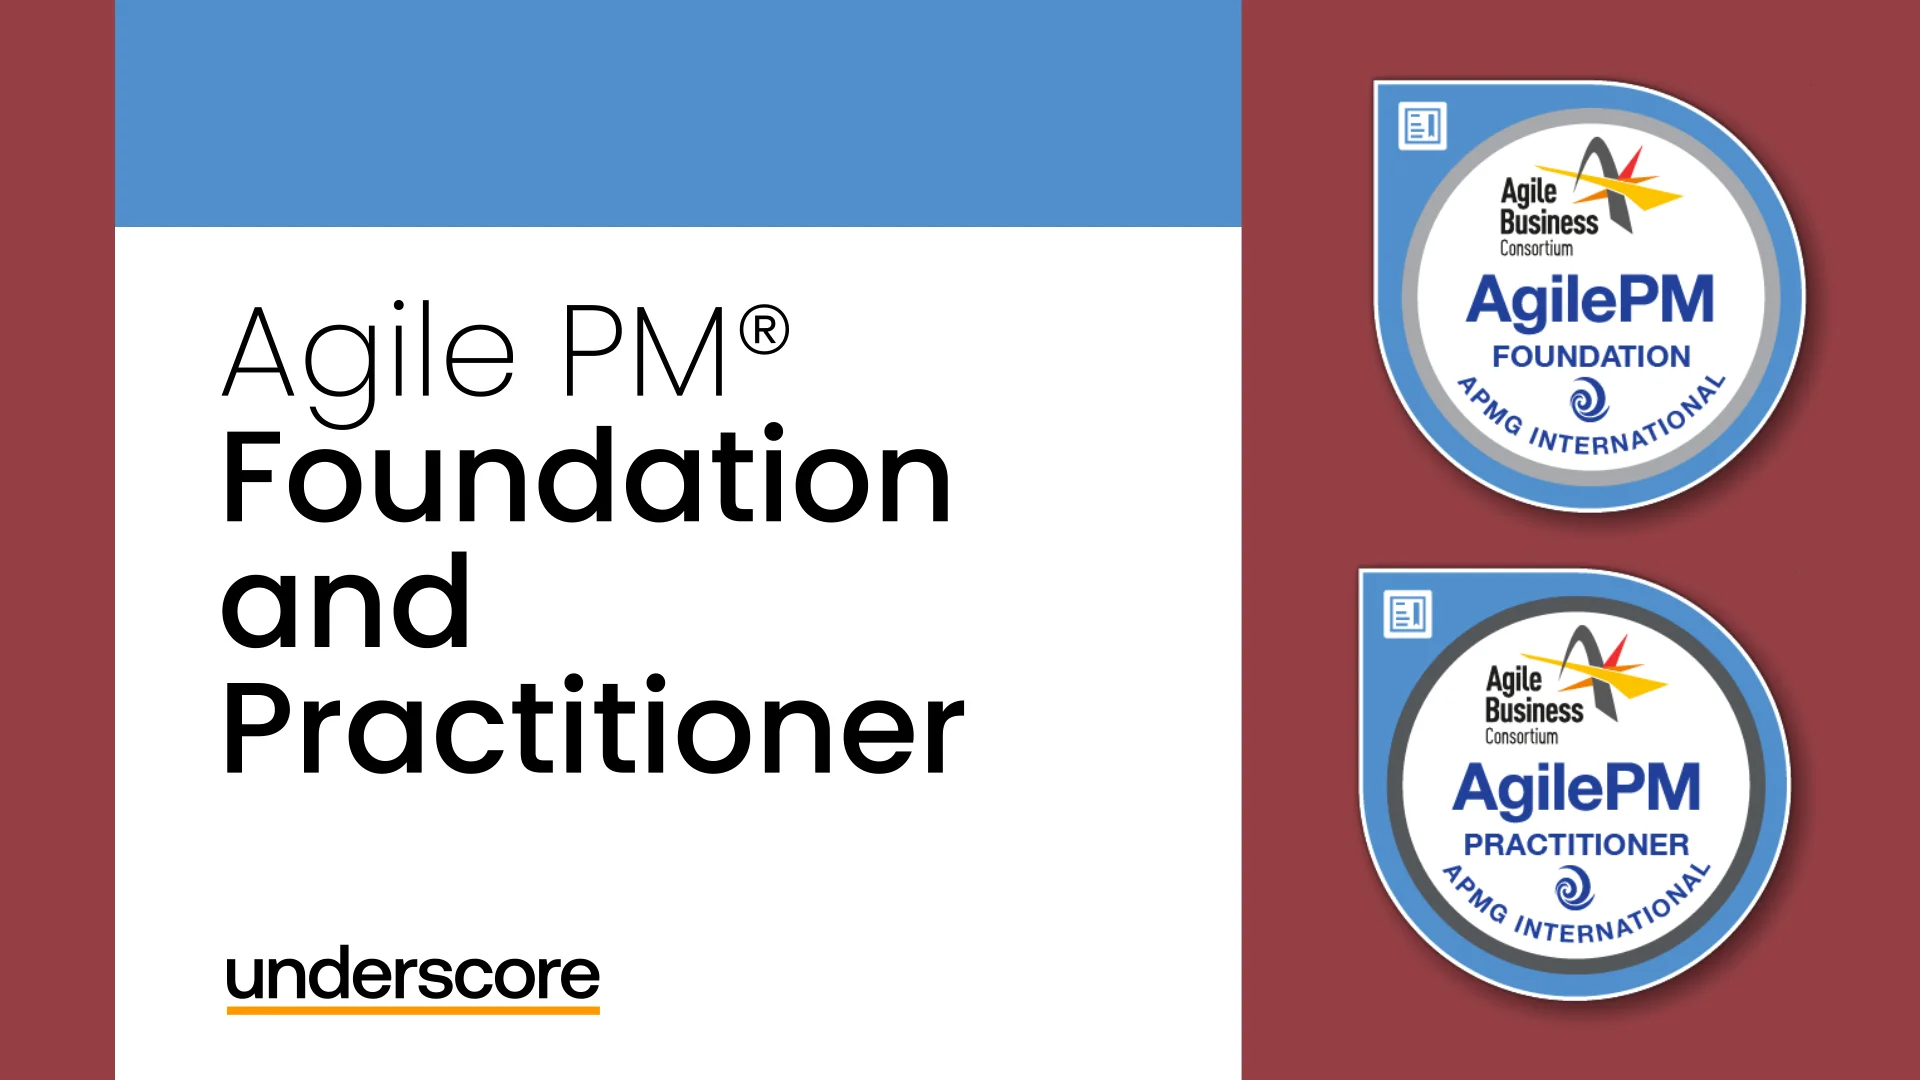 Agile PM® Foundation and Practitioner